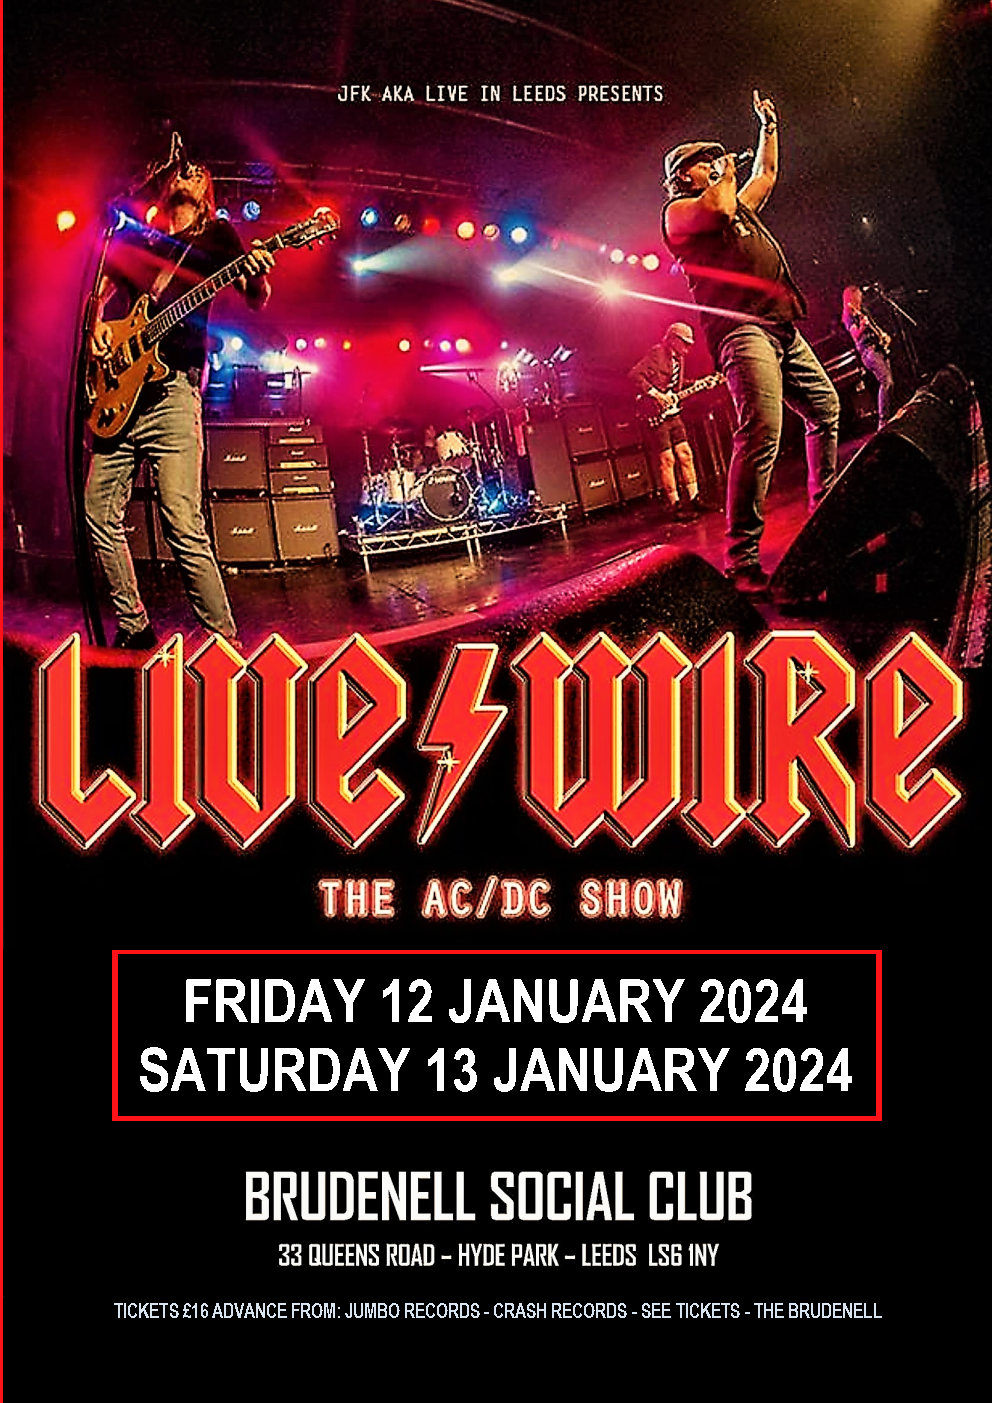 LiveWire The ACDC Show - Gig at Leeds Brudenell Social Club